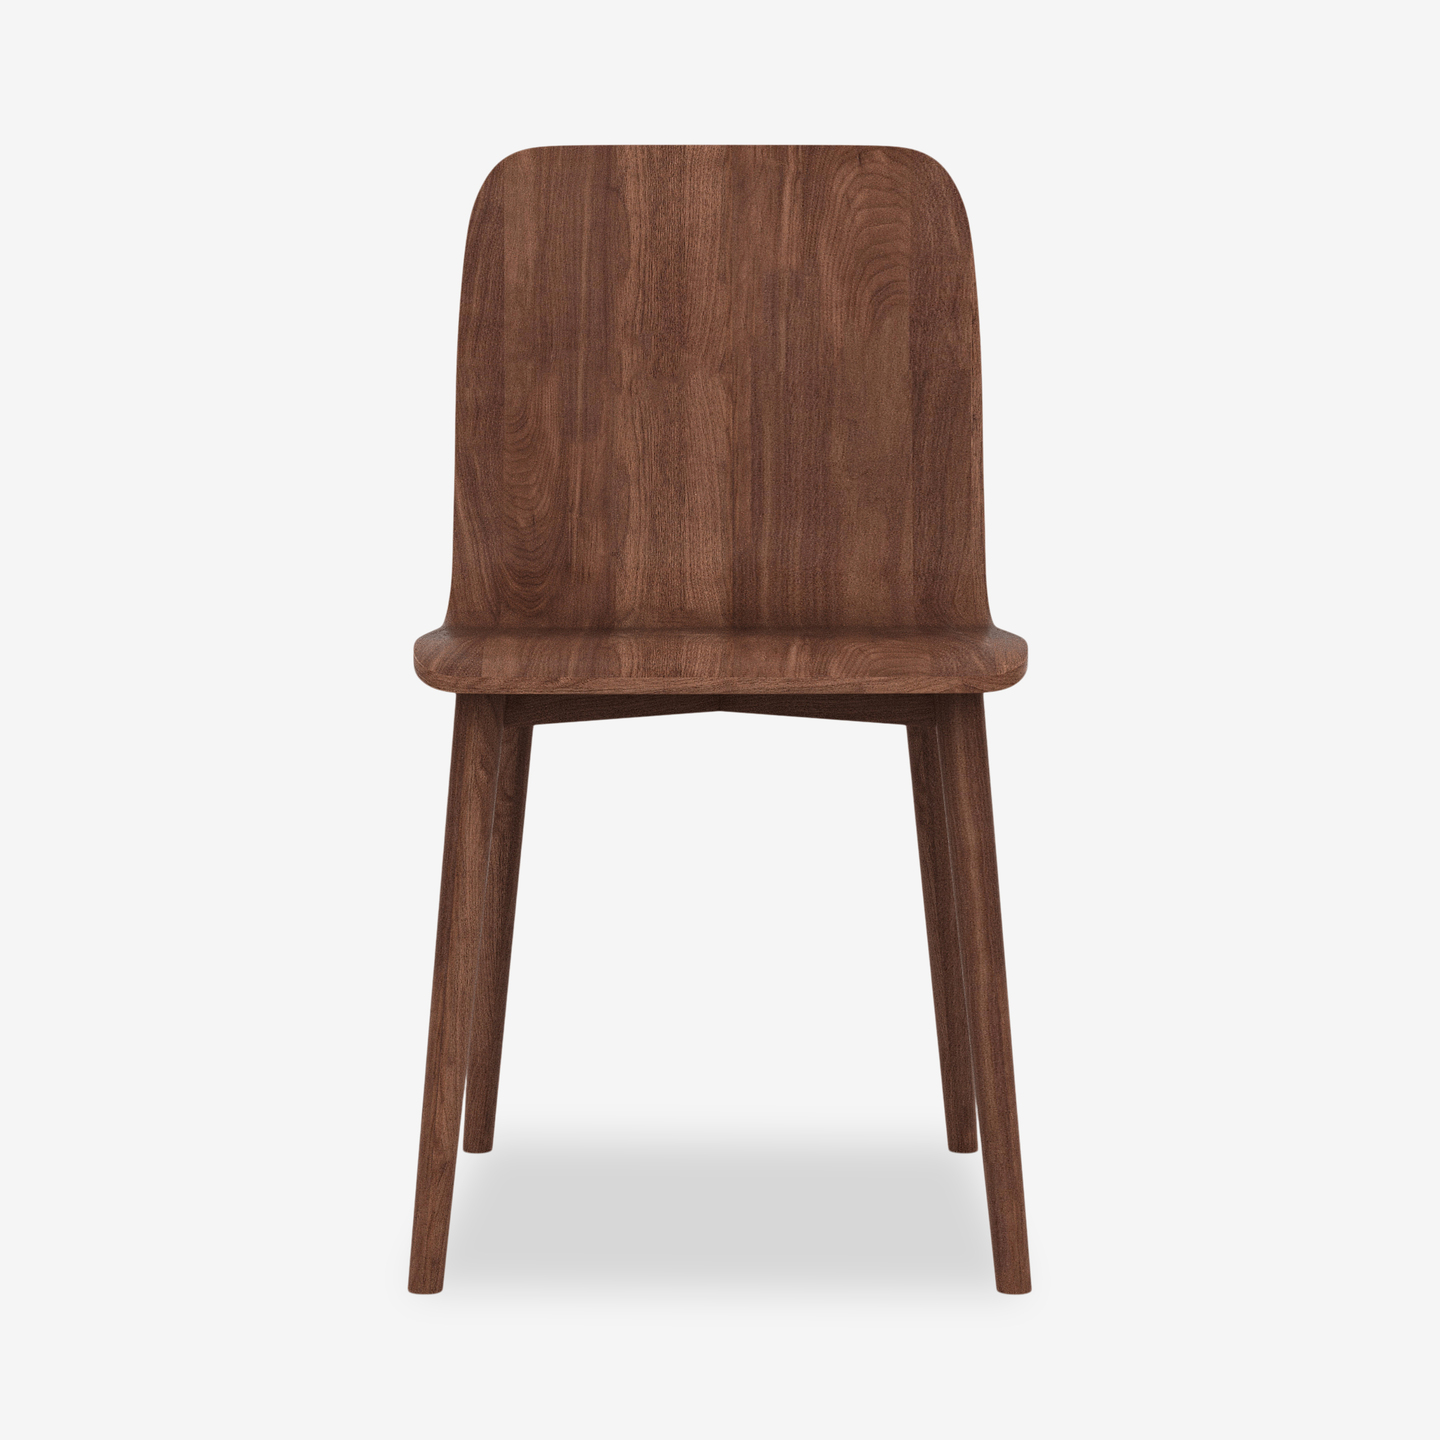 1341_Tami-Dining-Chair-Walnut_Front_2021